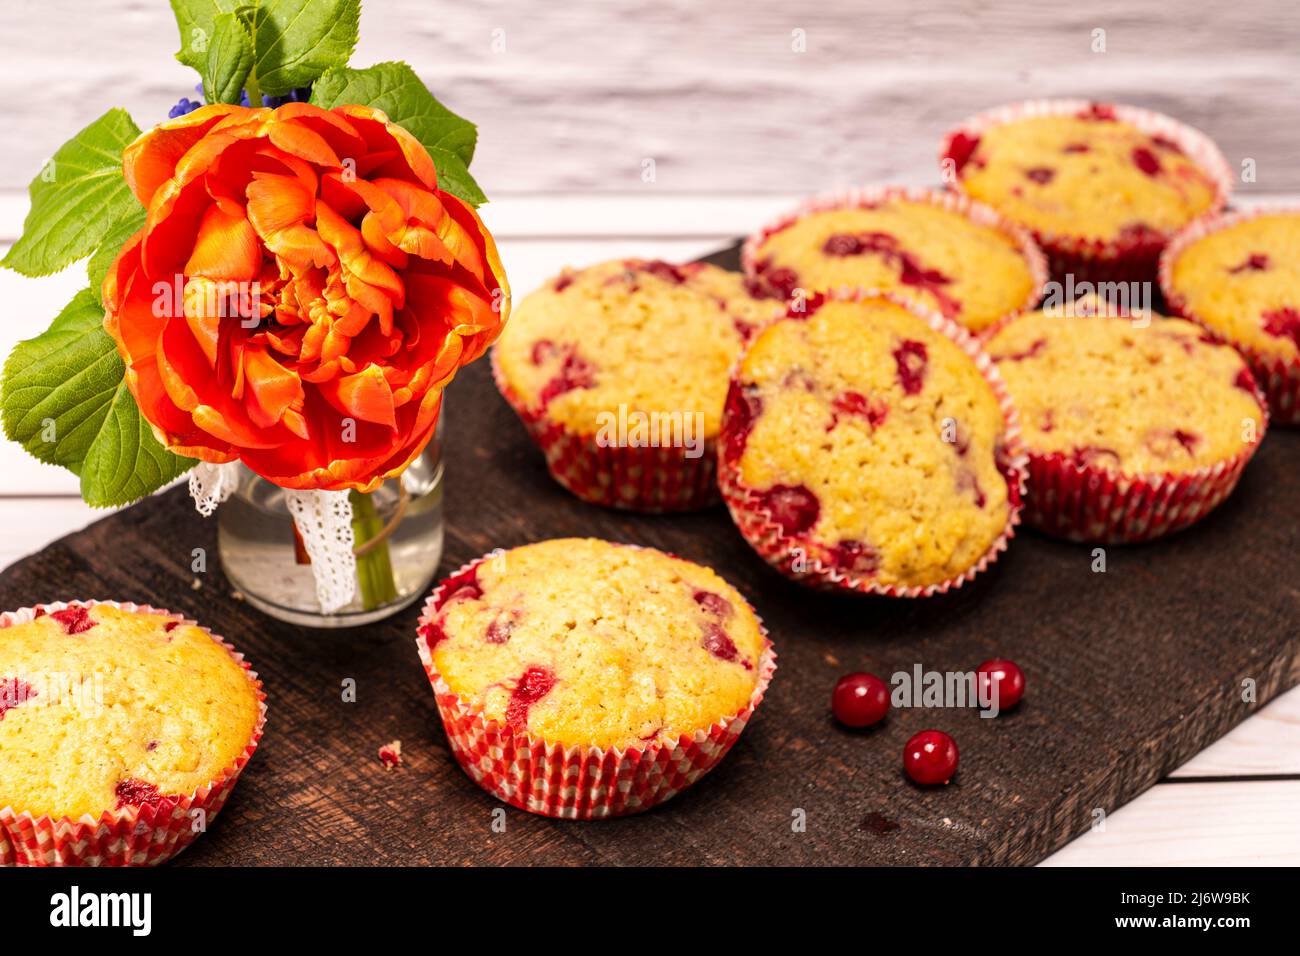 several currants muffins served on an old wooden board with bouquet of flowers Stock Photo